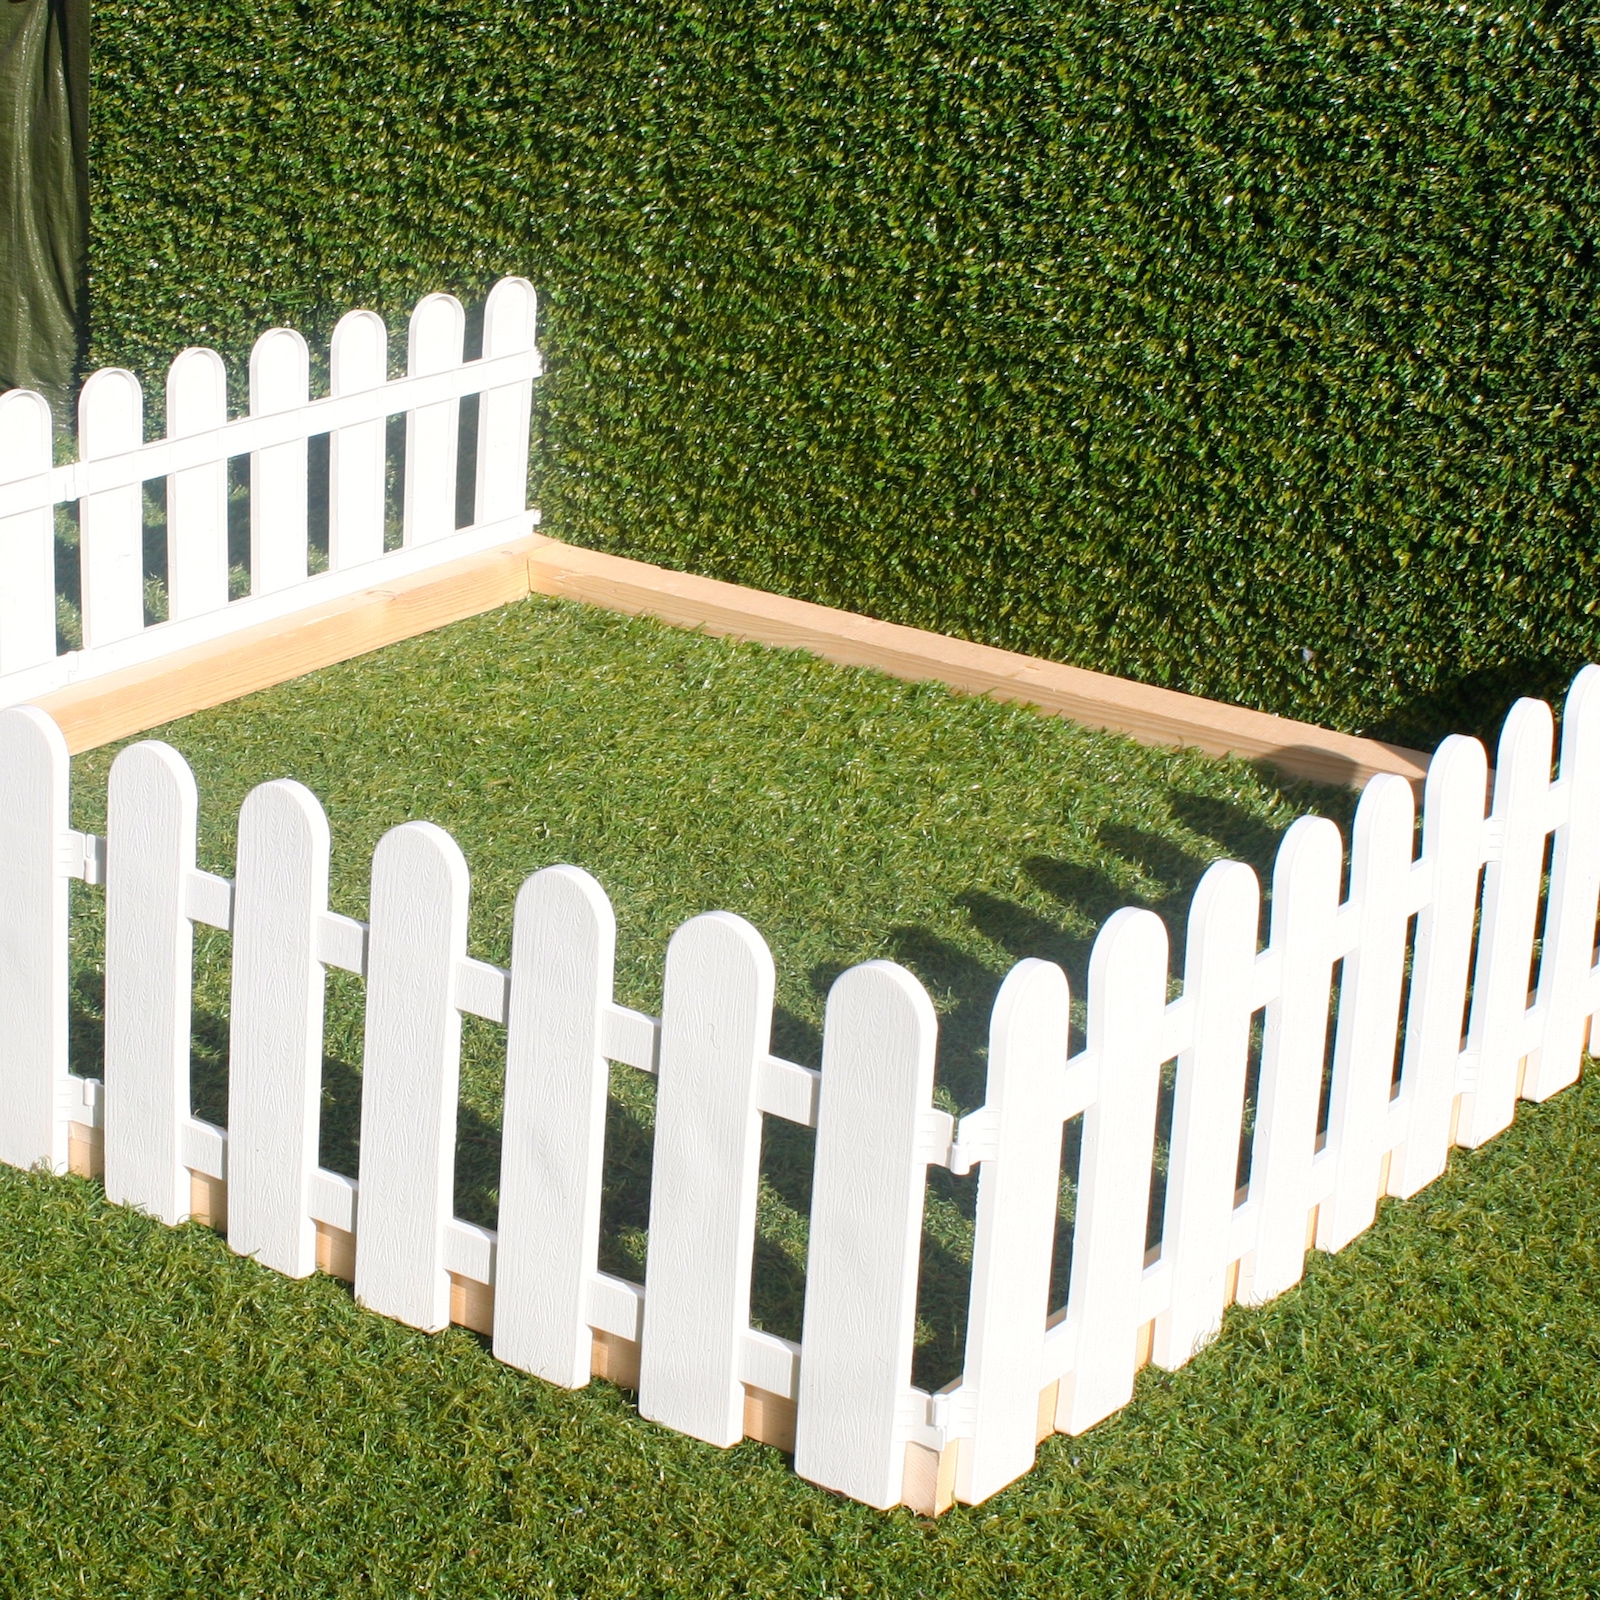 PLASTIC FENCING LAWN GRASS BORDER PATH GRAVE EDGING FANCY SMALL ...